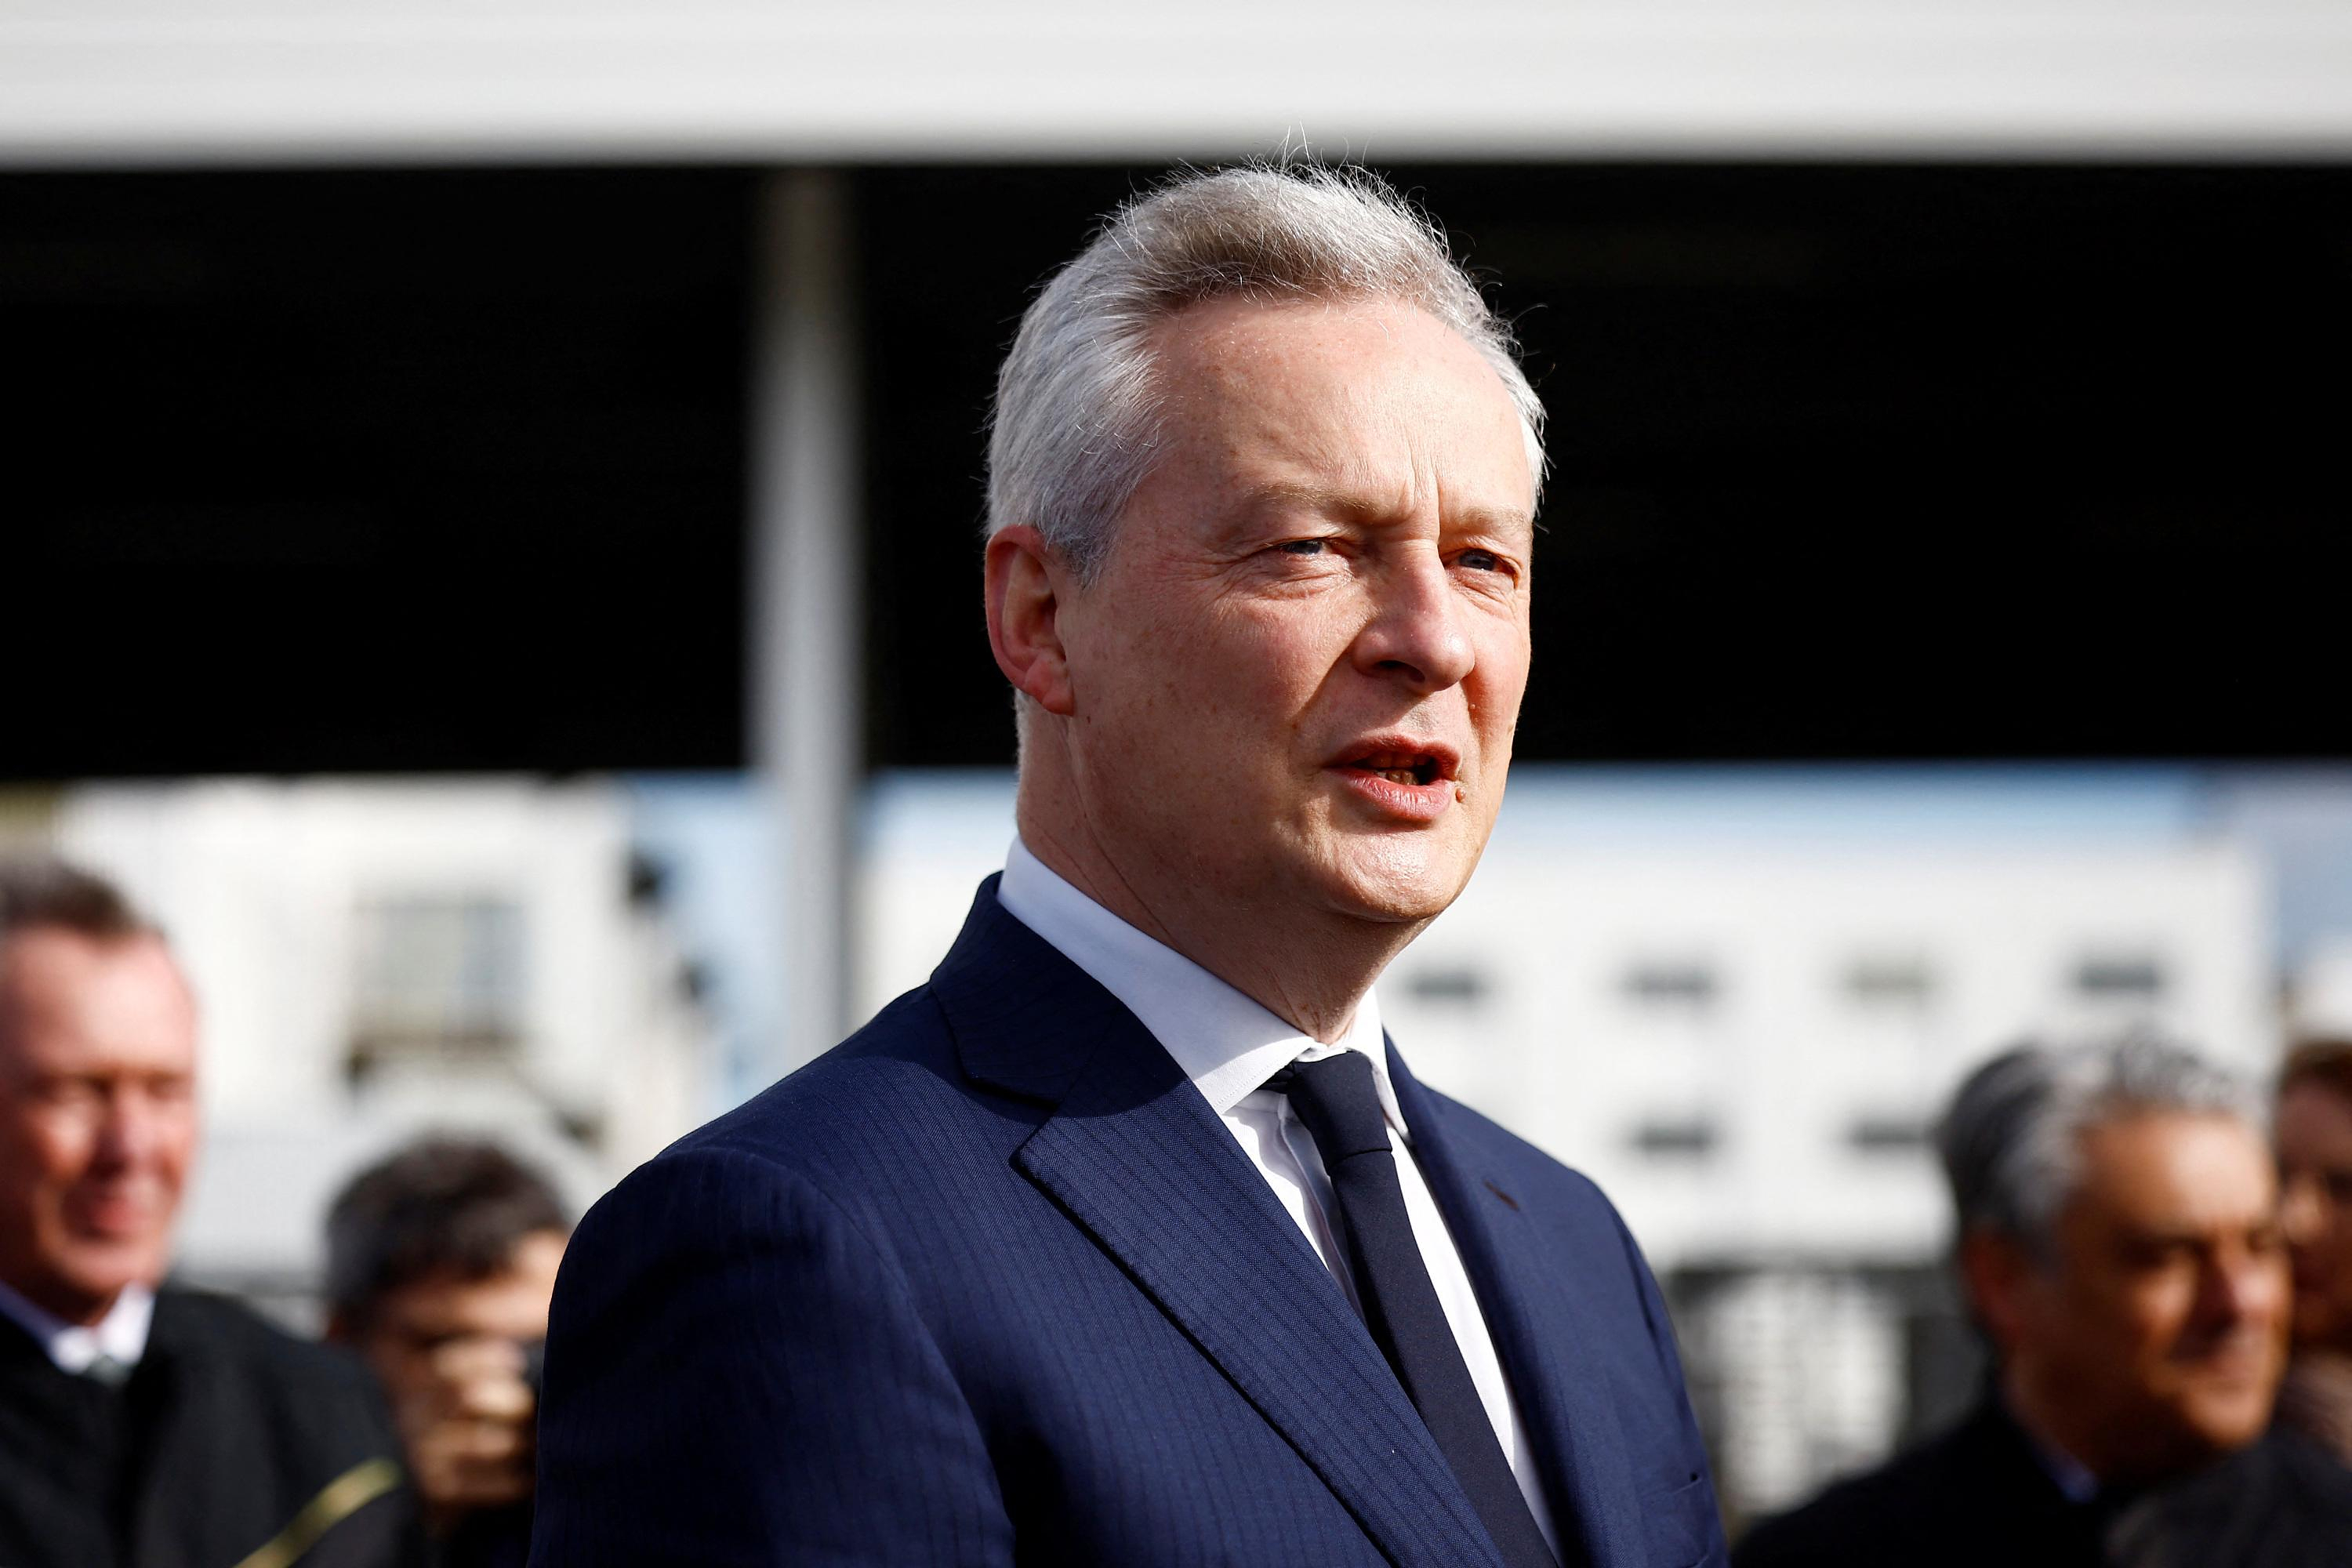 “It would be stupid”: Bruno Le Maire once again brushes aside any tax increase